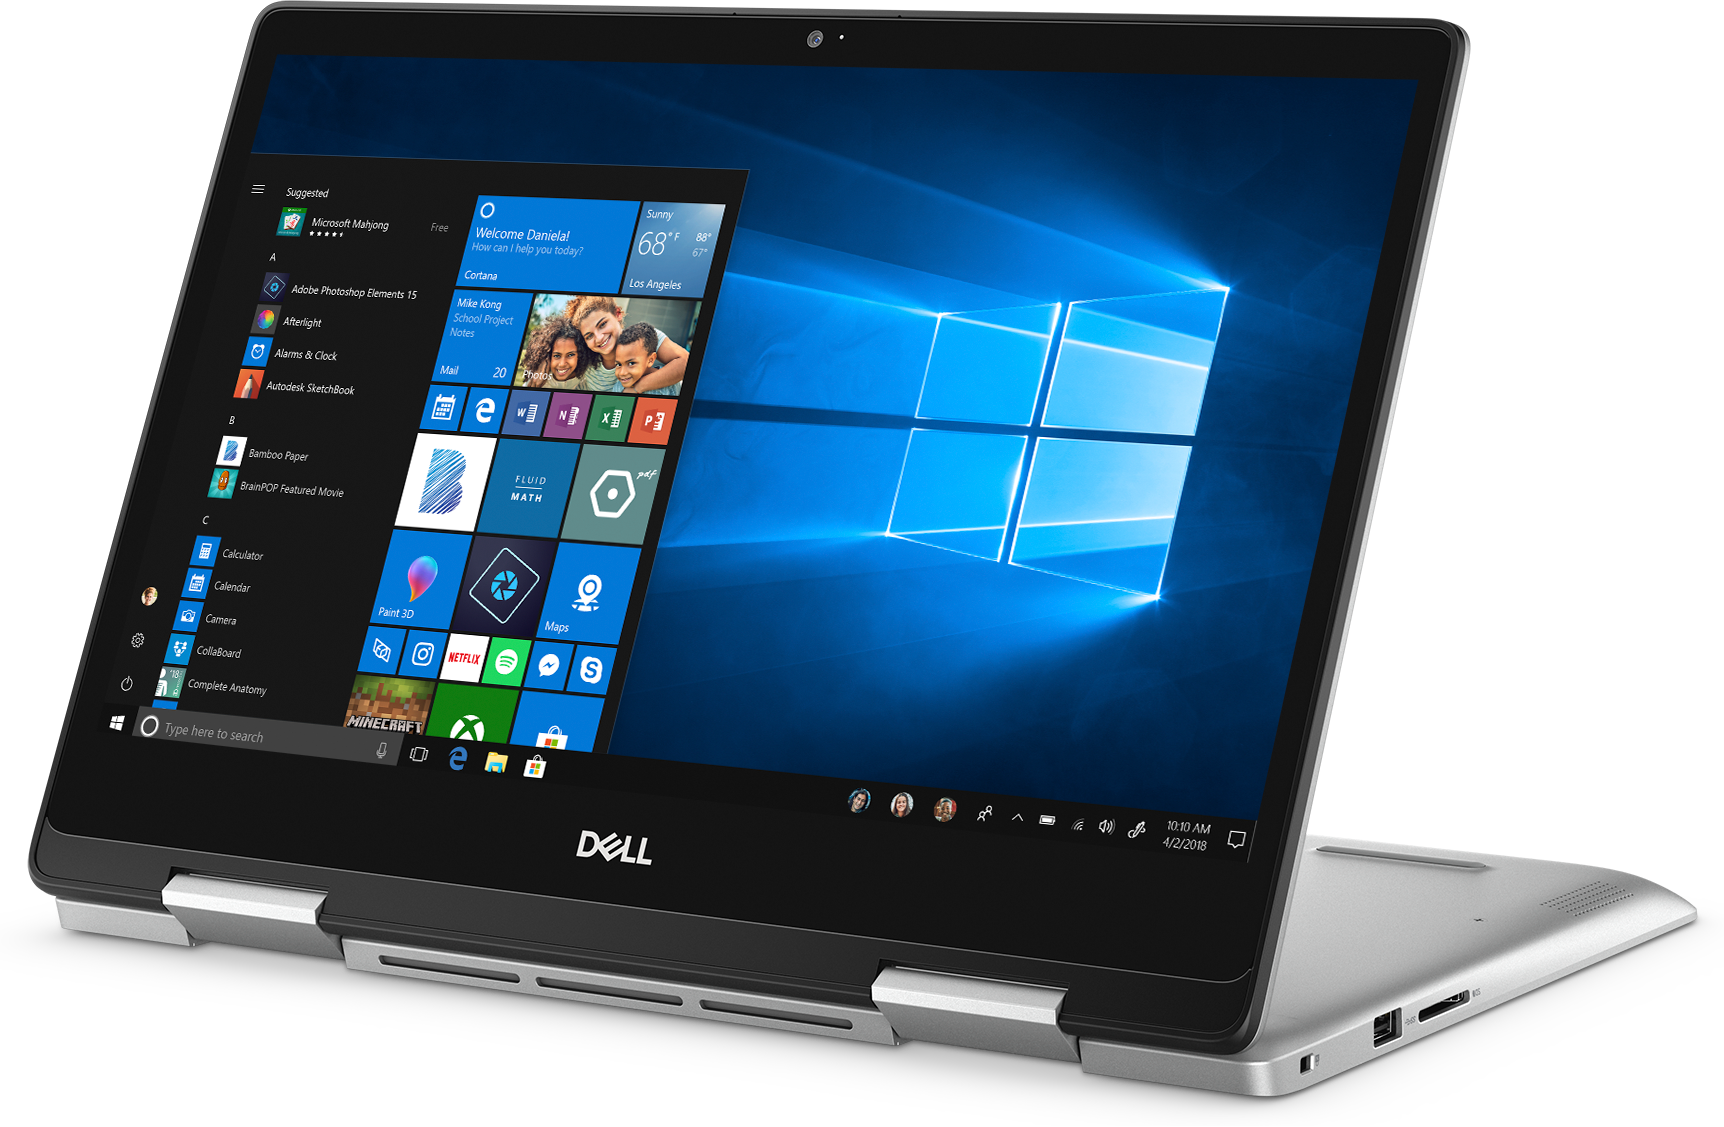 Dell Inspiron 14 5000 2 In 1 Touch Laptop I7 8565u 8gb Memory256gb